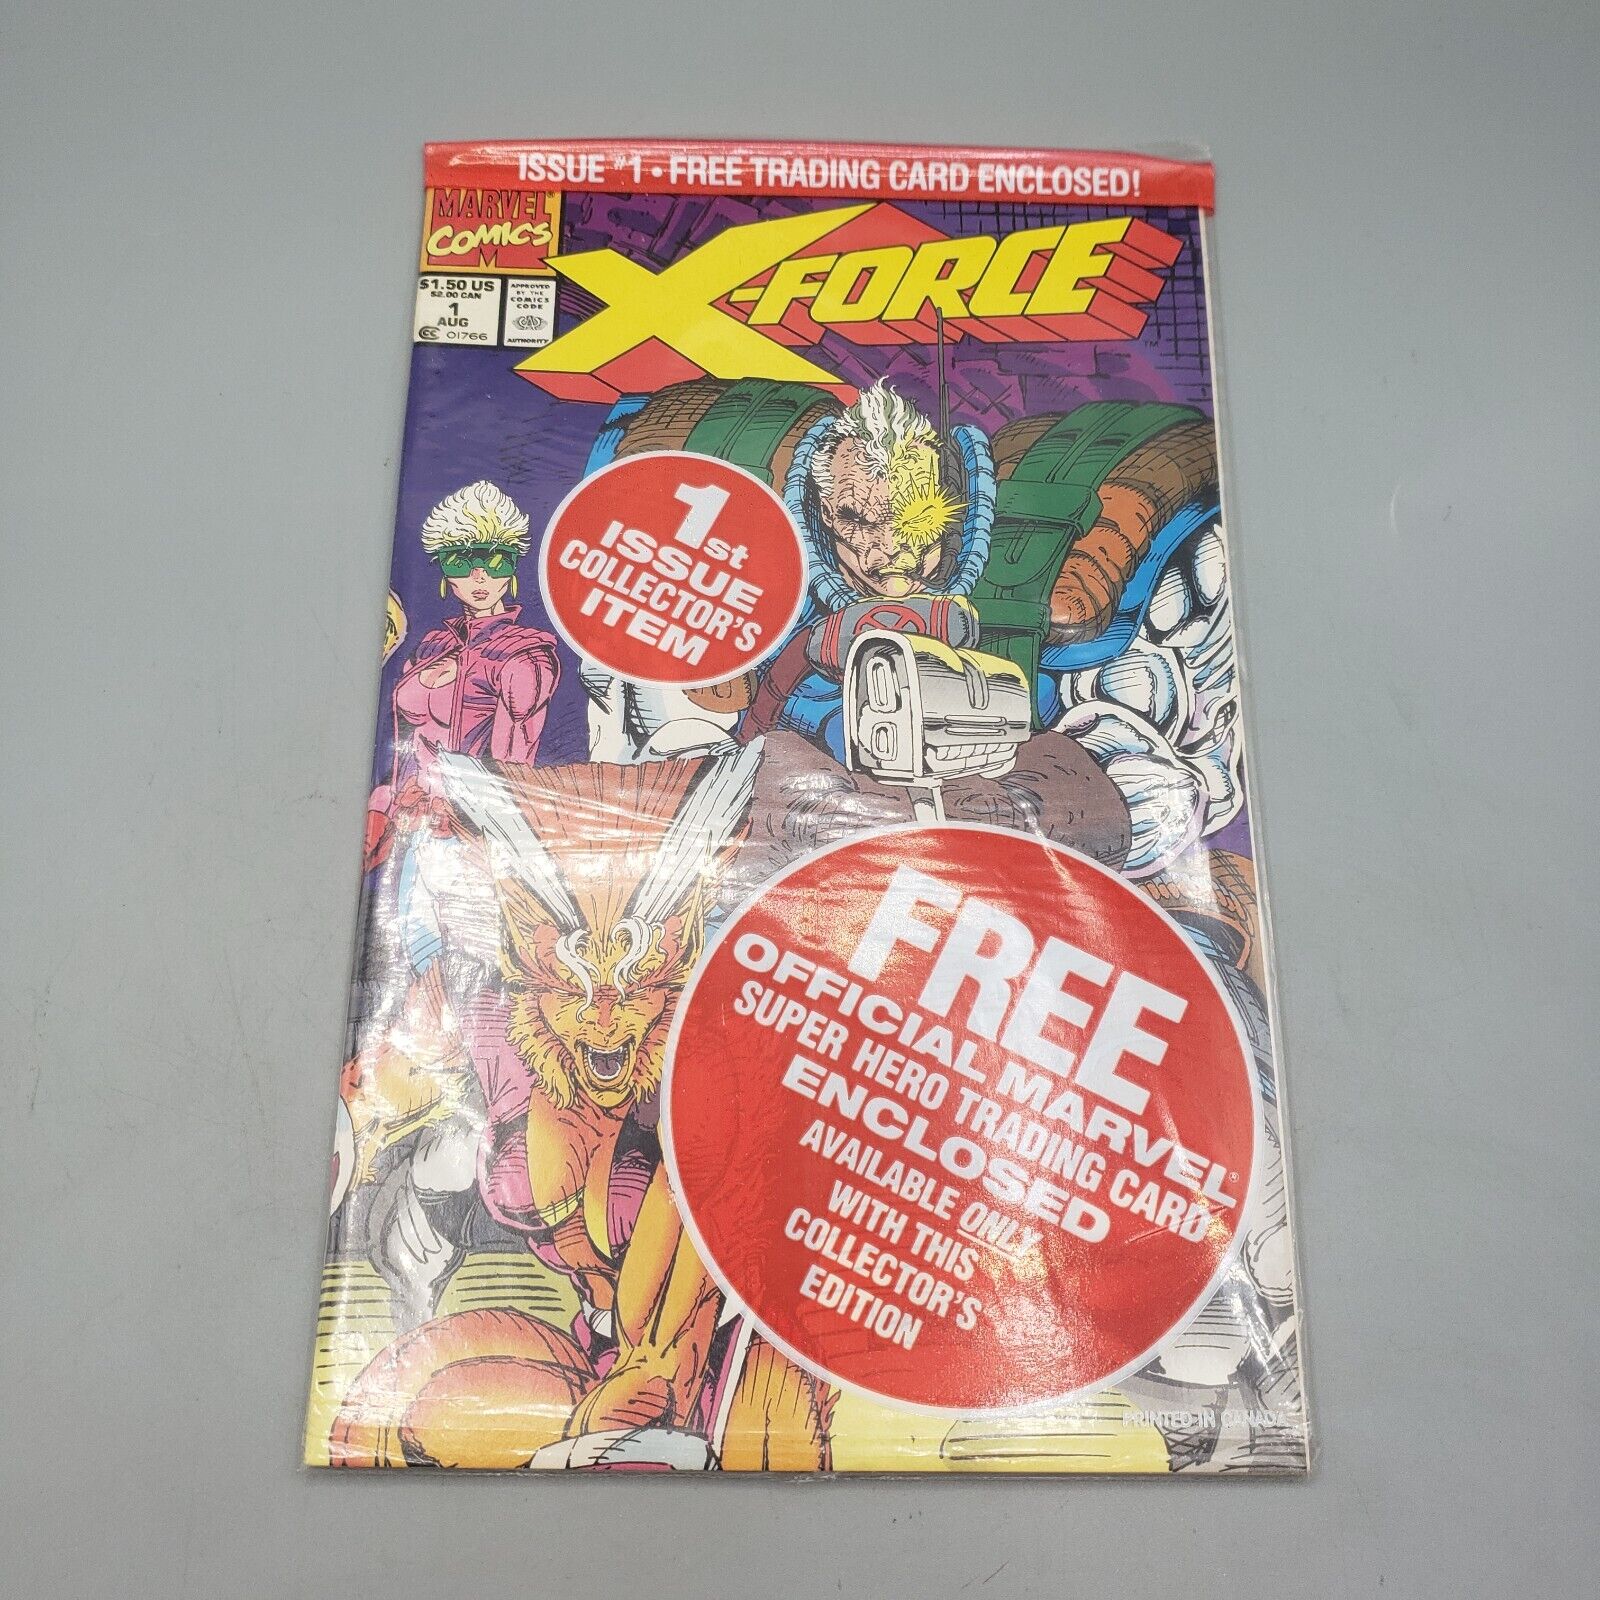 X-Force Vol 1 #1 Aug 91 A Force To Be Reckoned With Softcover Marvel Comic Book